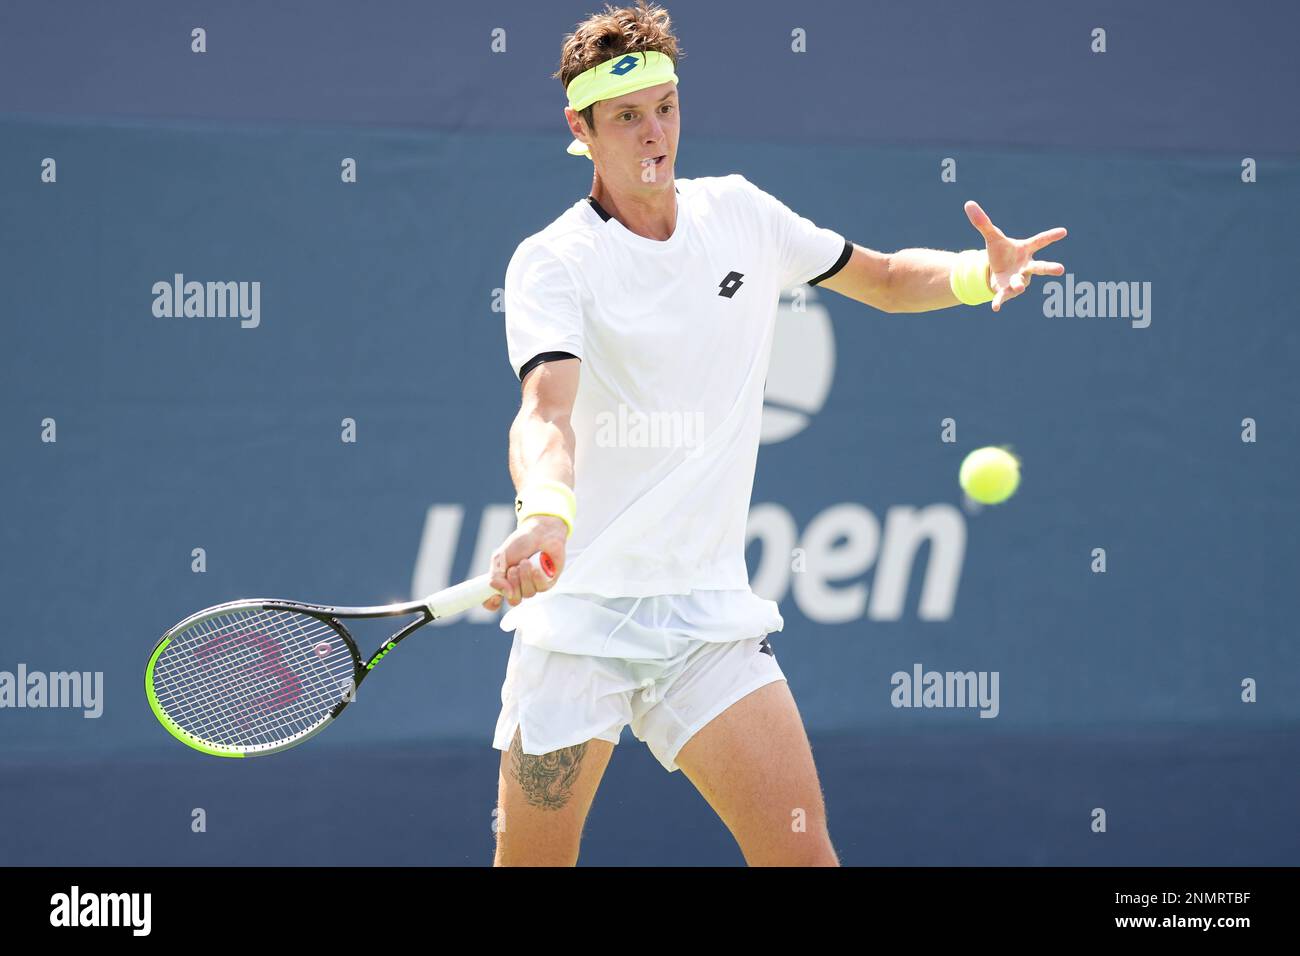 Maxime Janvier in action during a qualifying match at the 2021 US Open,  Friday, Aug. 27, 2021 in Flushing, NY. (Darren Carroll/USTA Stock Photo -  Alamy